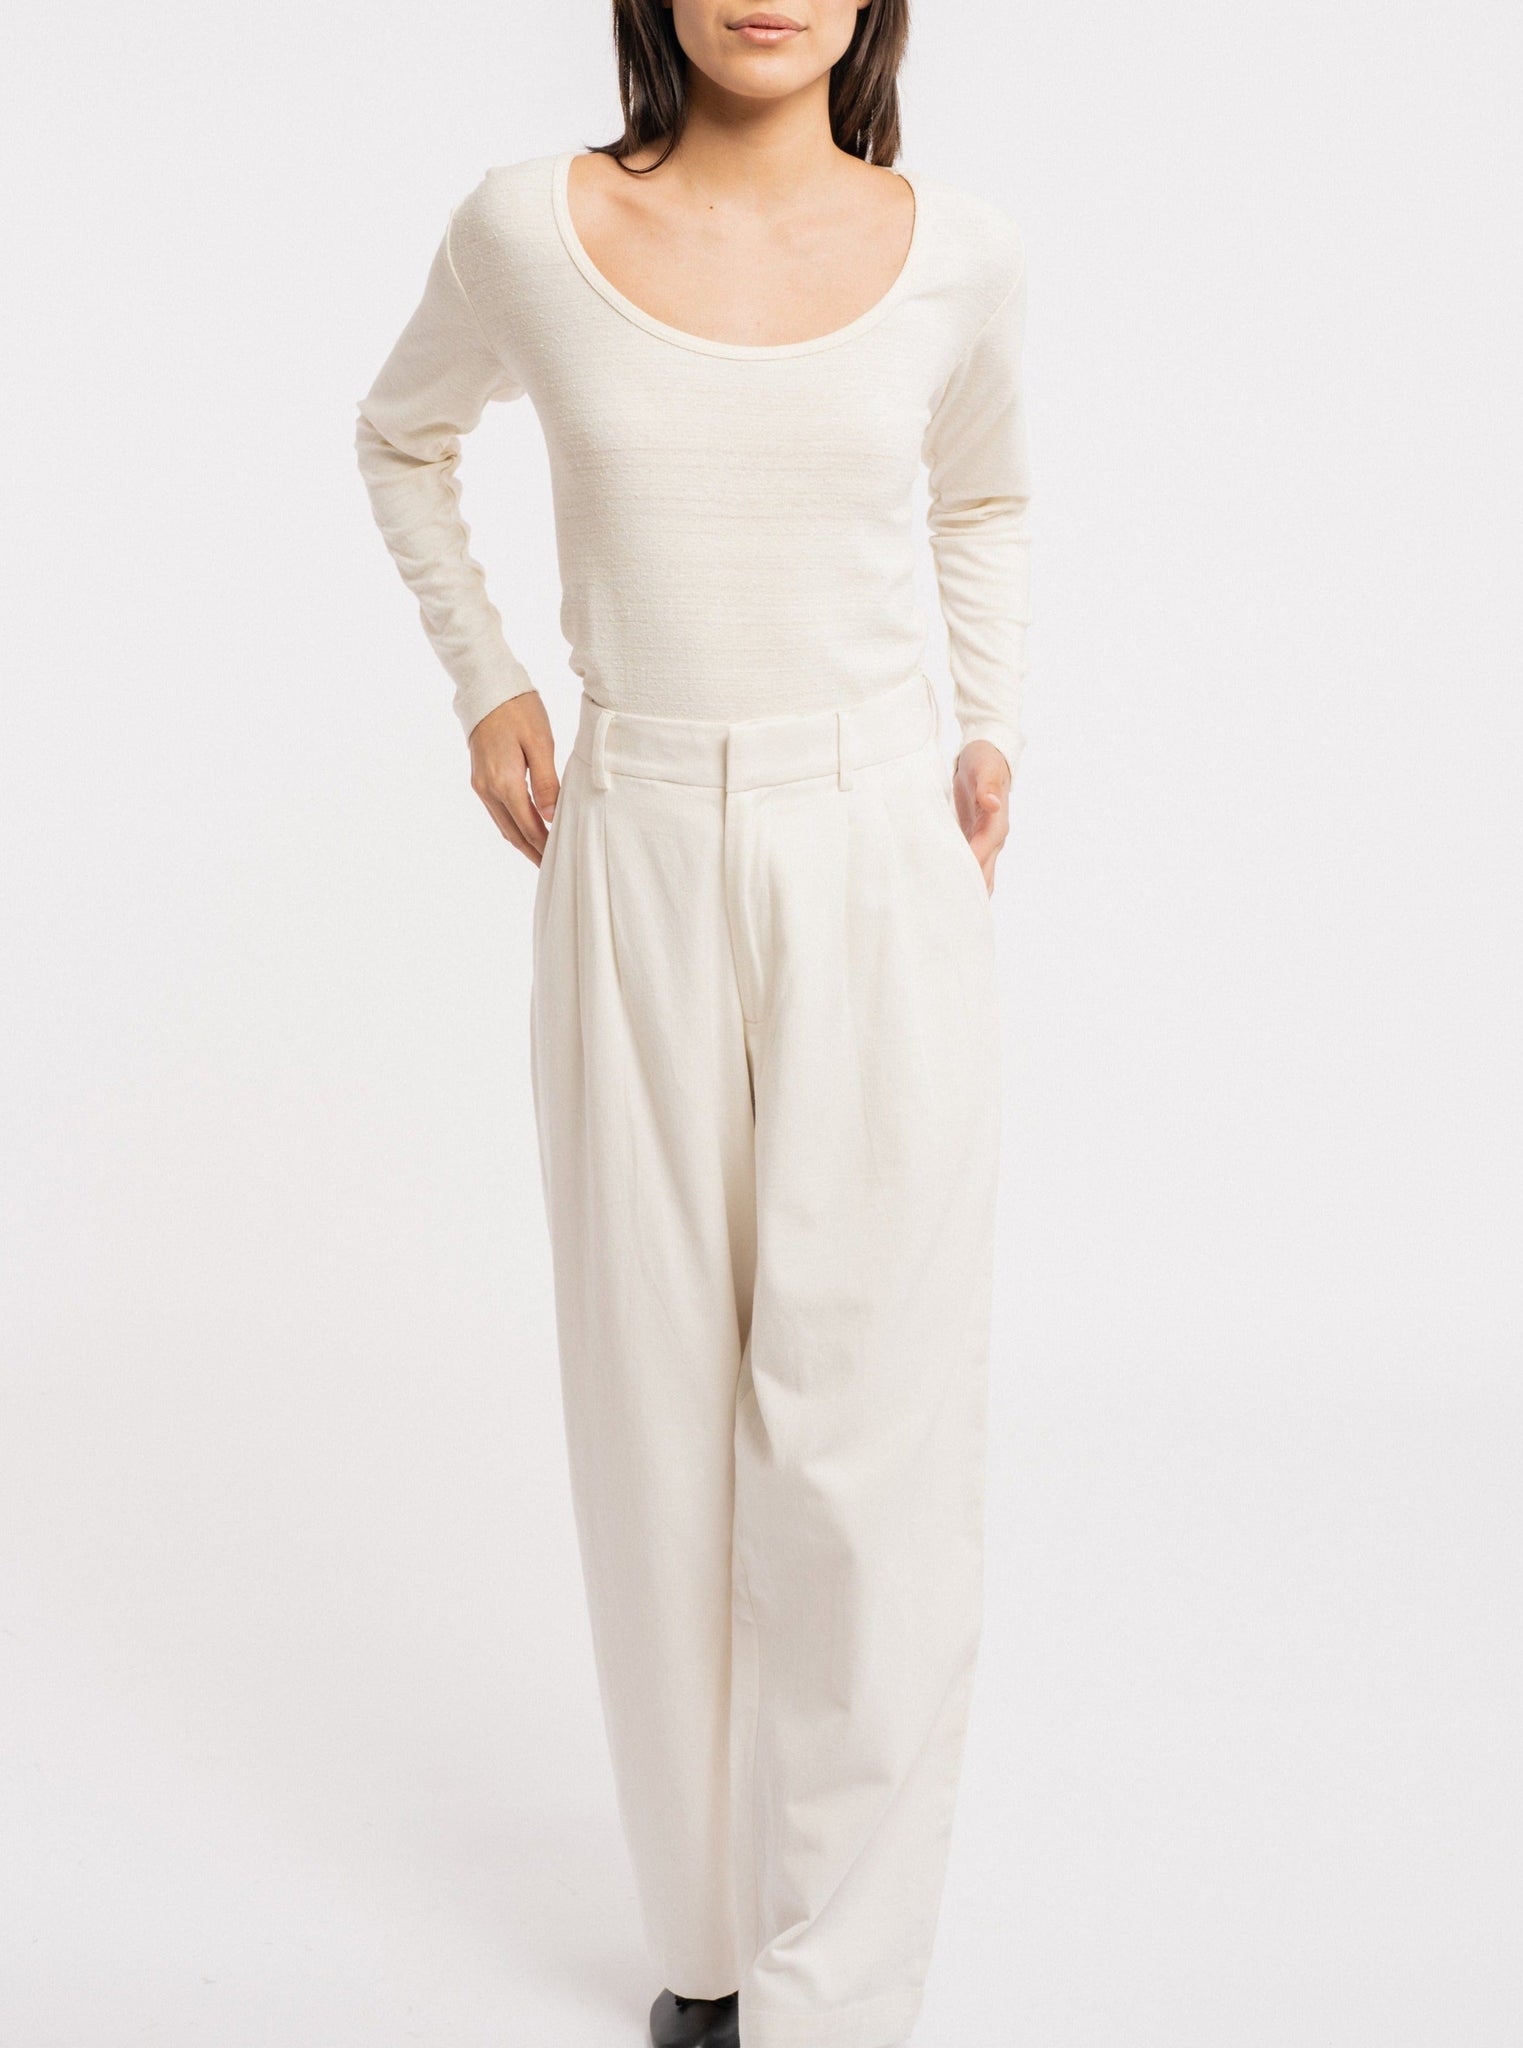 The model is wearing a white long sleeve top with a Scoop Neck Tee - Ivory and wide leg pants.